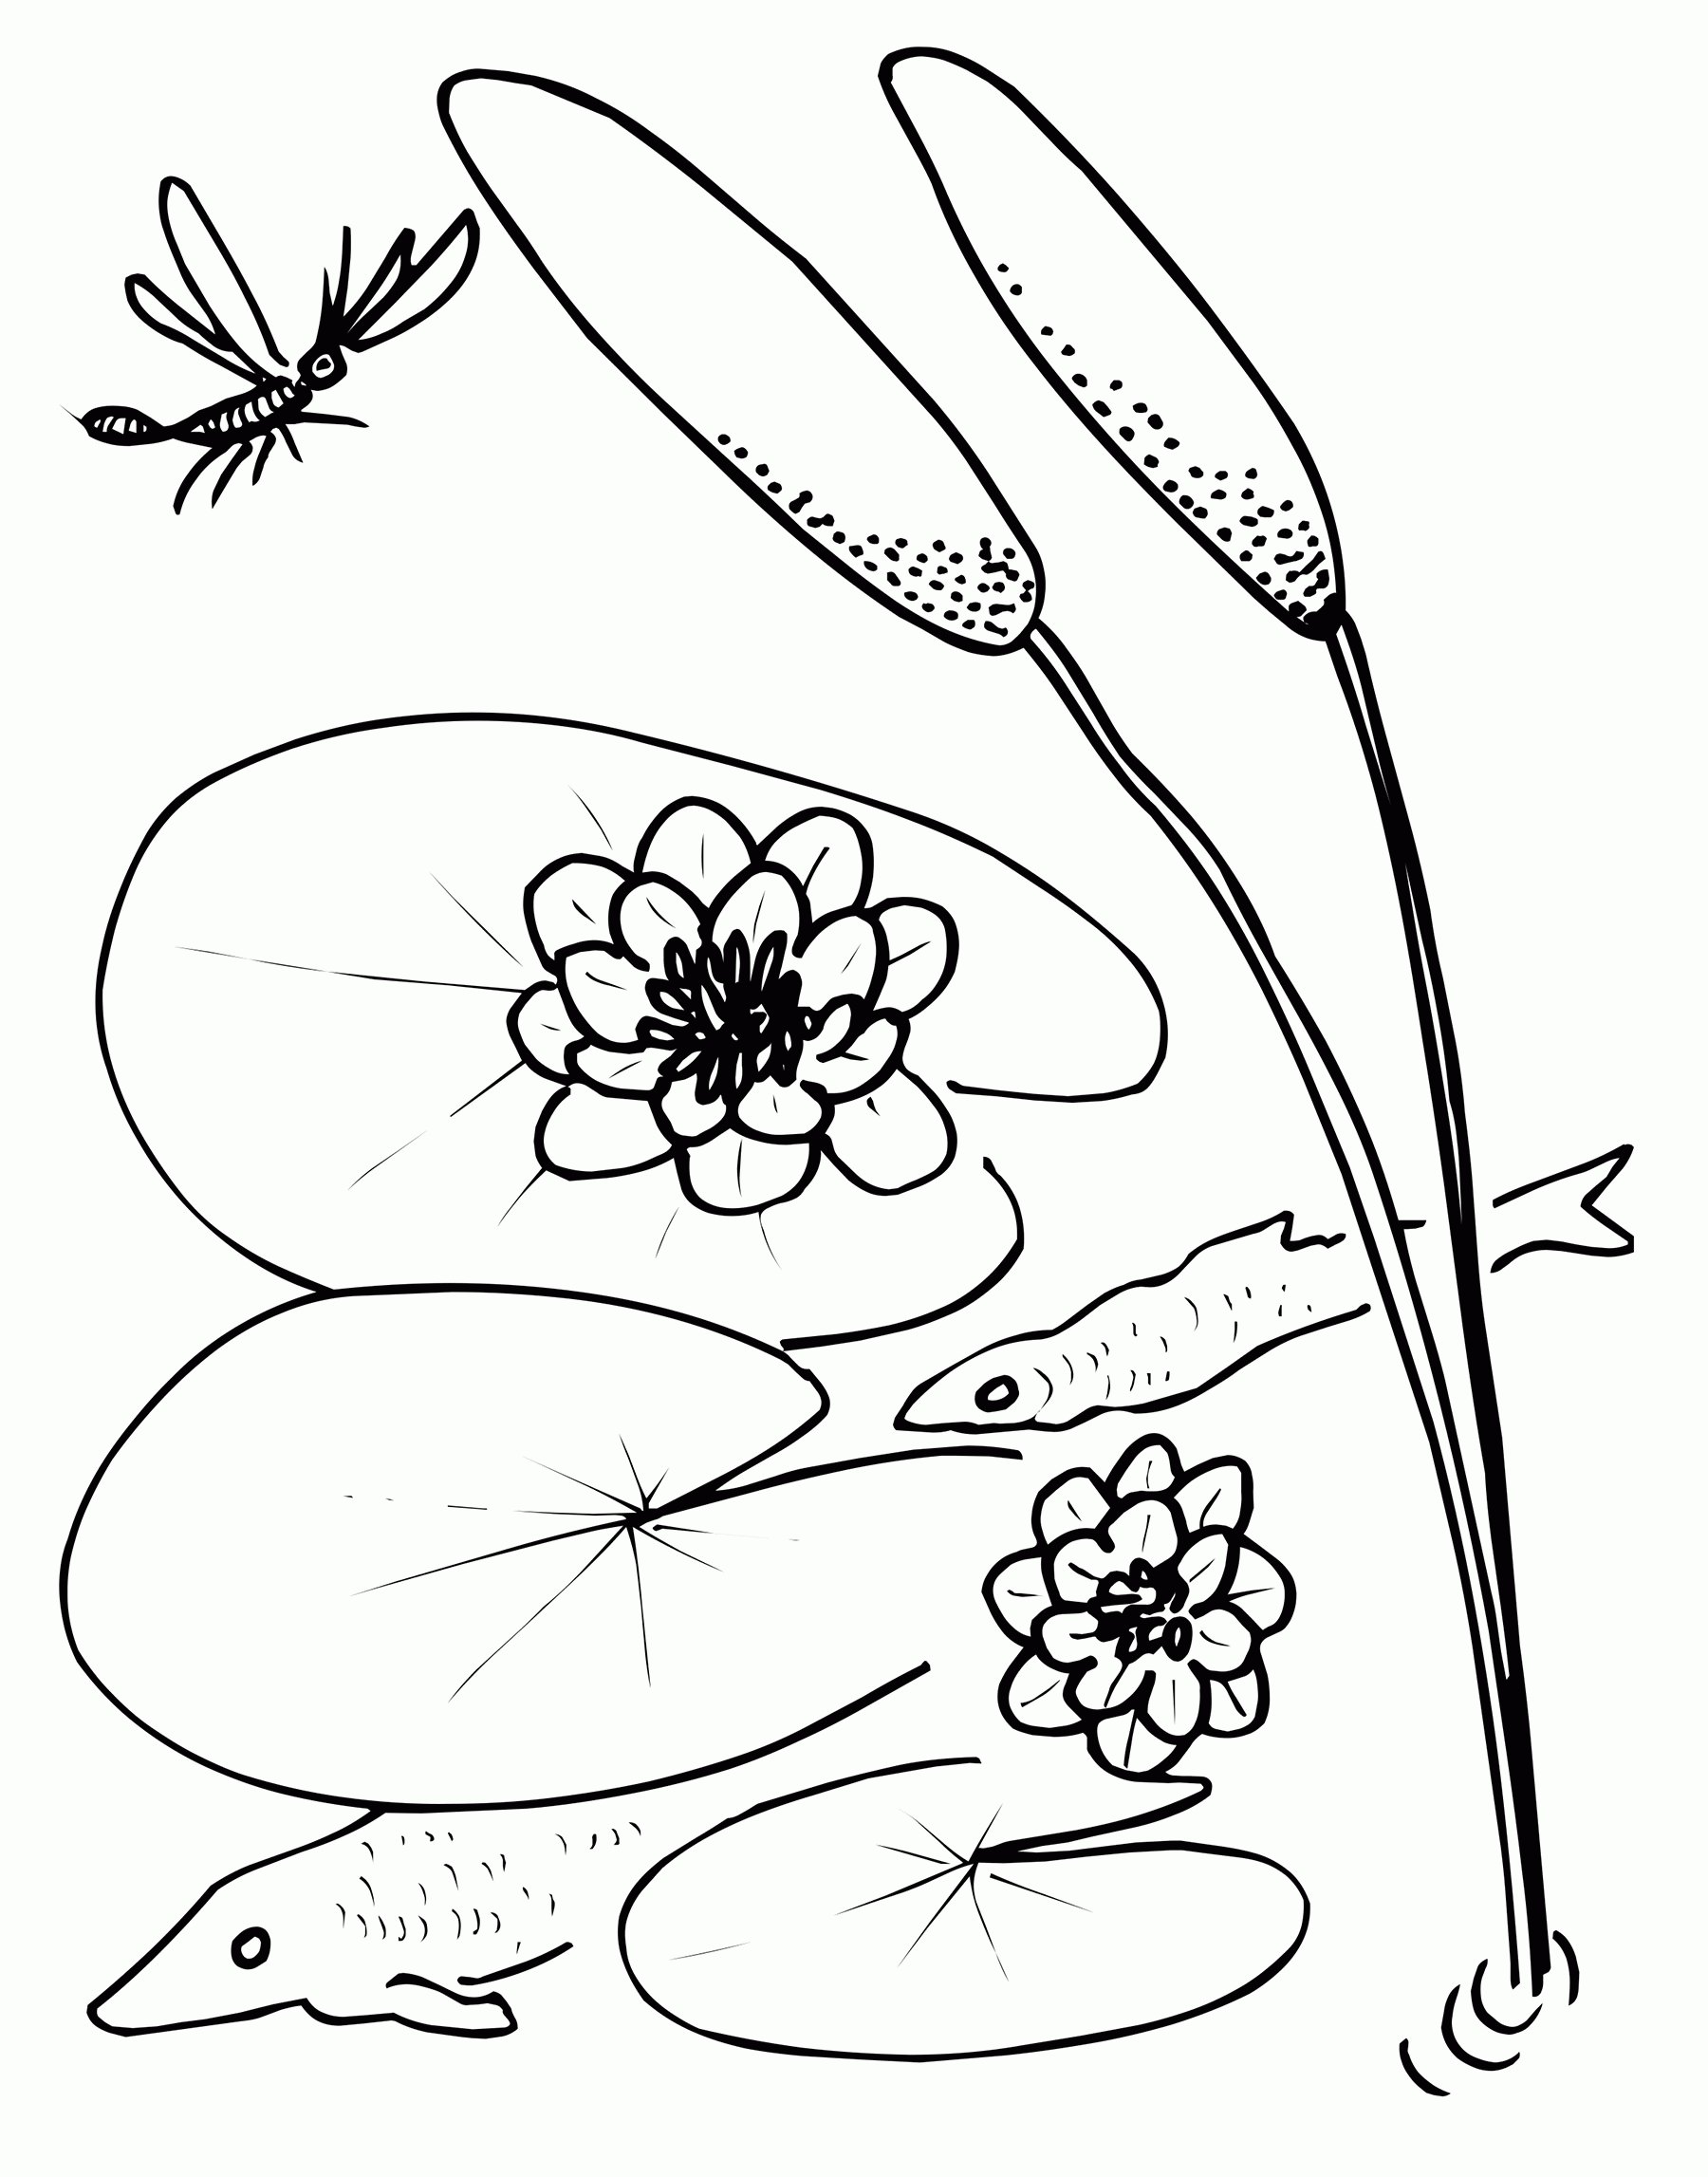 Lily Pad and snake Coloring Page - Free Printable Coloring Pages for Kids